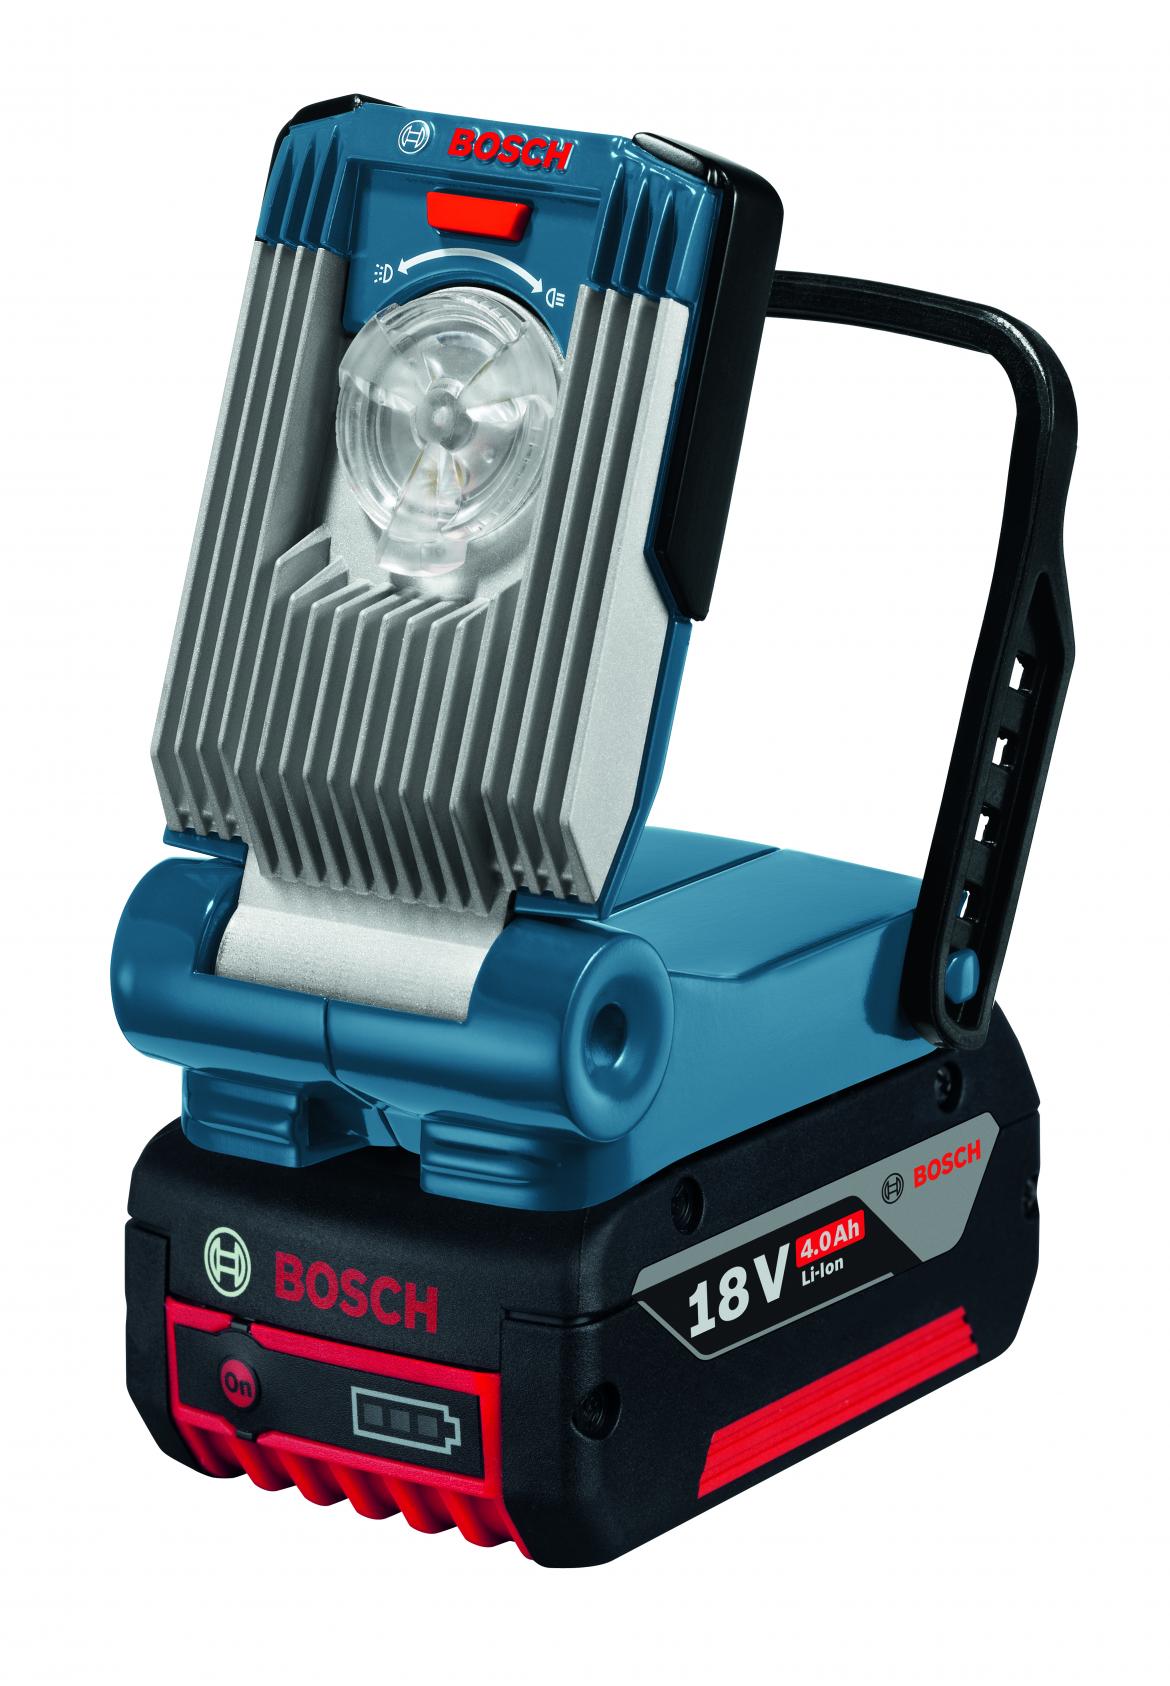 This 18-volt work light uses three LEDs to produce 420 lumens. Able to adjust to different angles, it can shine on a specific area or, with a turn of the control dial, provide diffuse light for a larger area. The 6.0-Ah battery offers continuous runtime of more than 13 hours